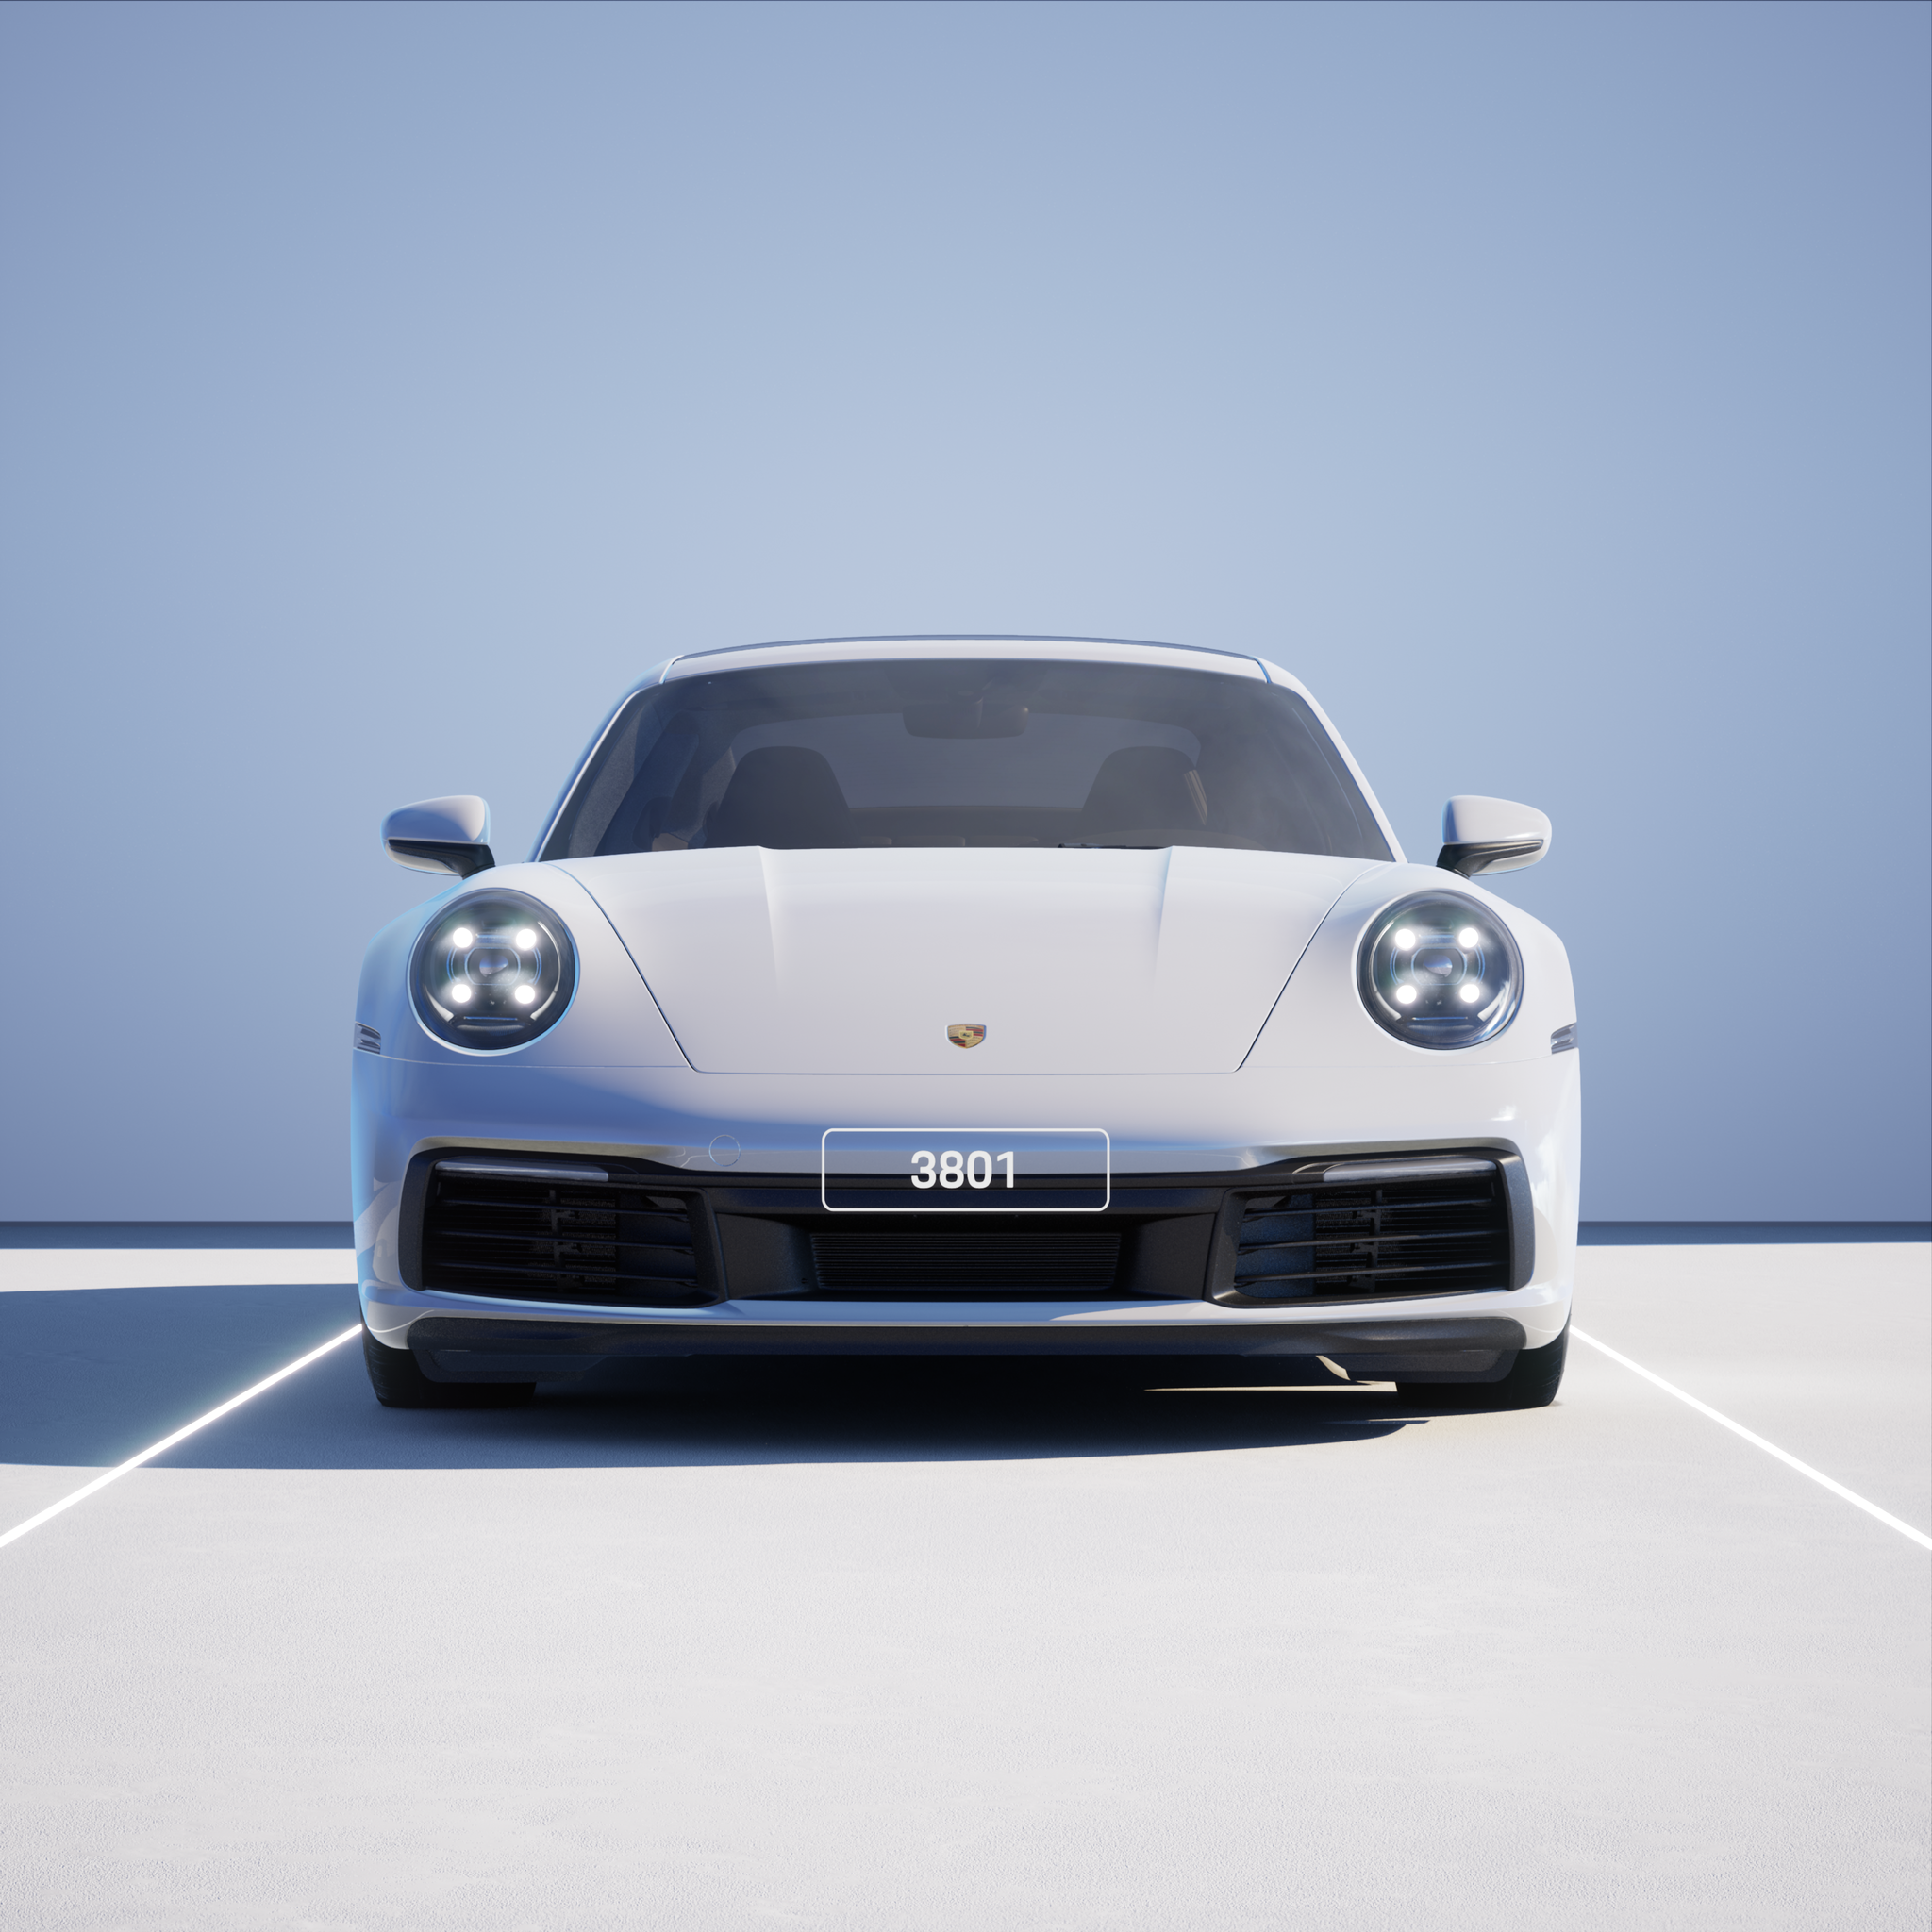 The PORSCHΞ 911 3801 image in phase